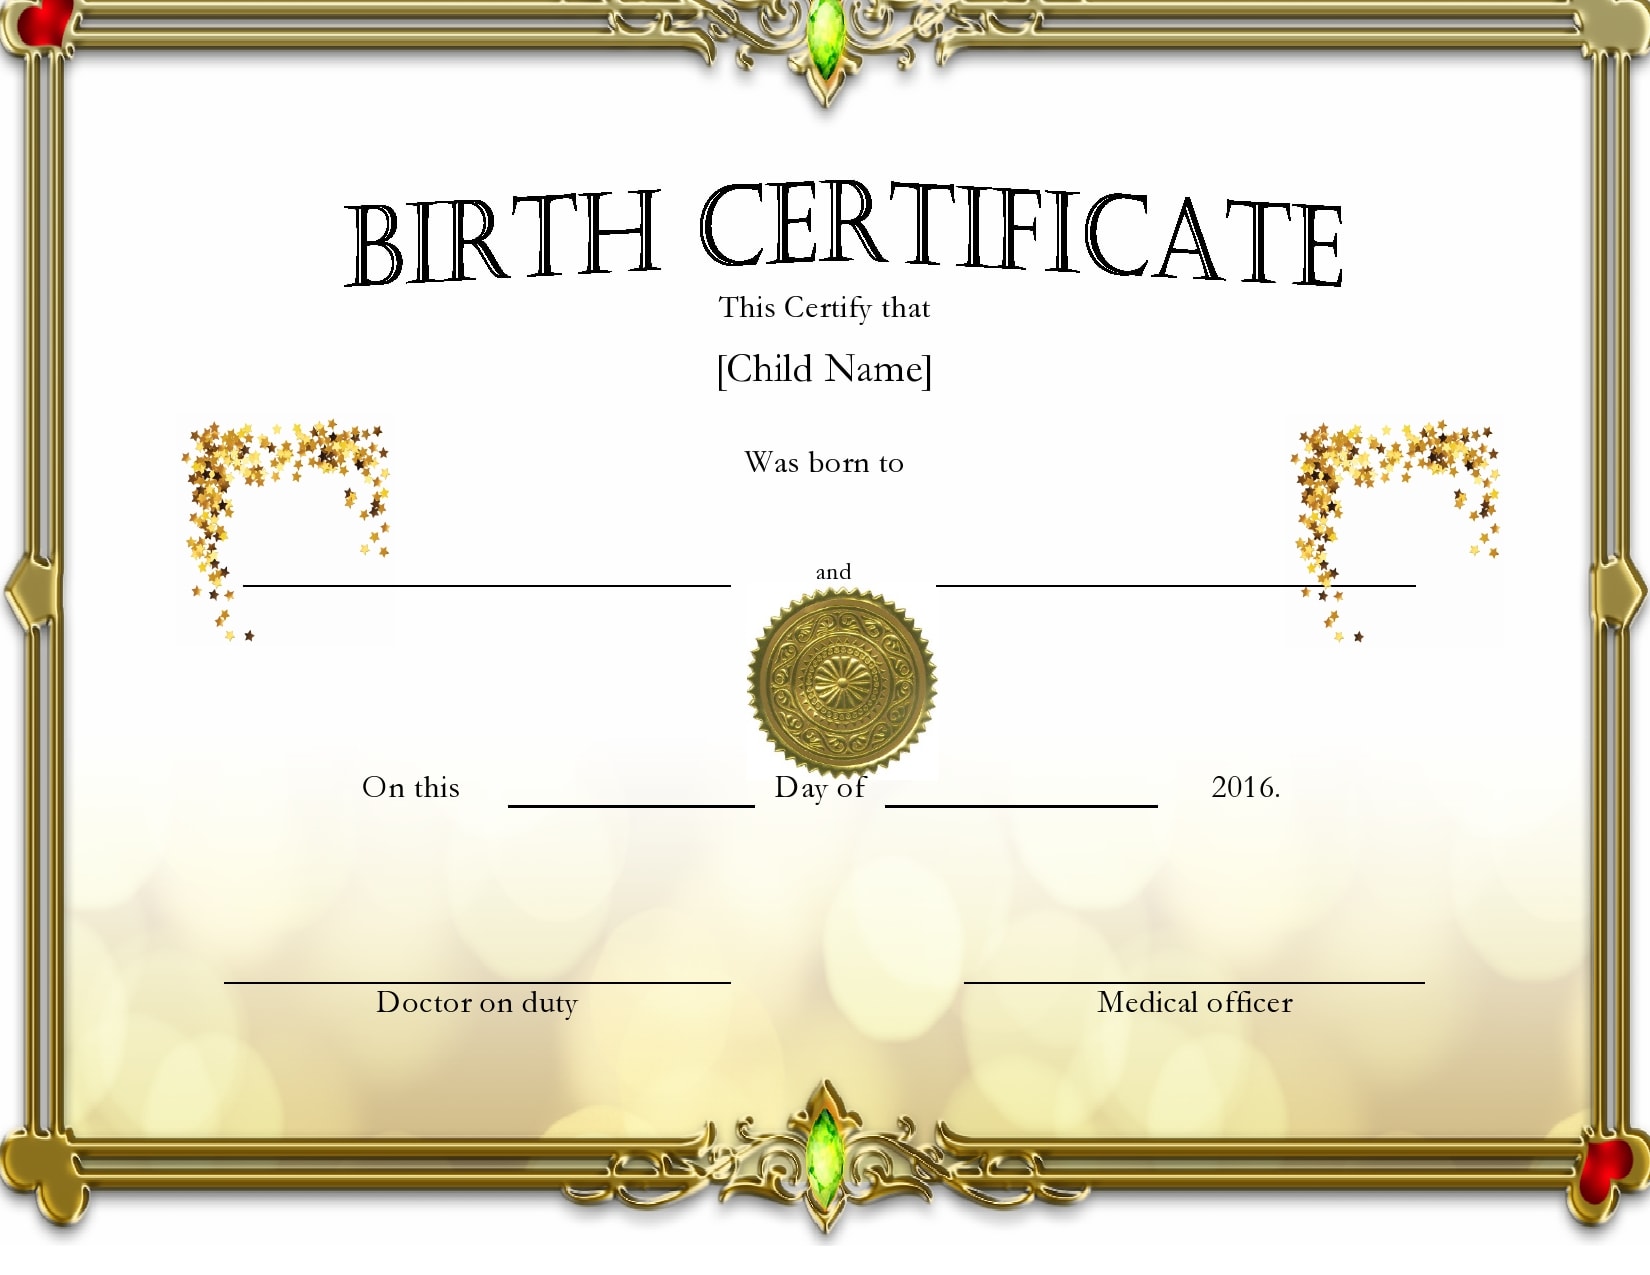 11 Blank Birth Certificate Templates (& Examples) - PrintableTemplates For Novelty Birth Certificate Template